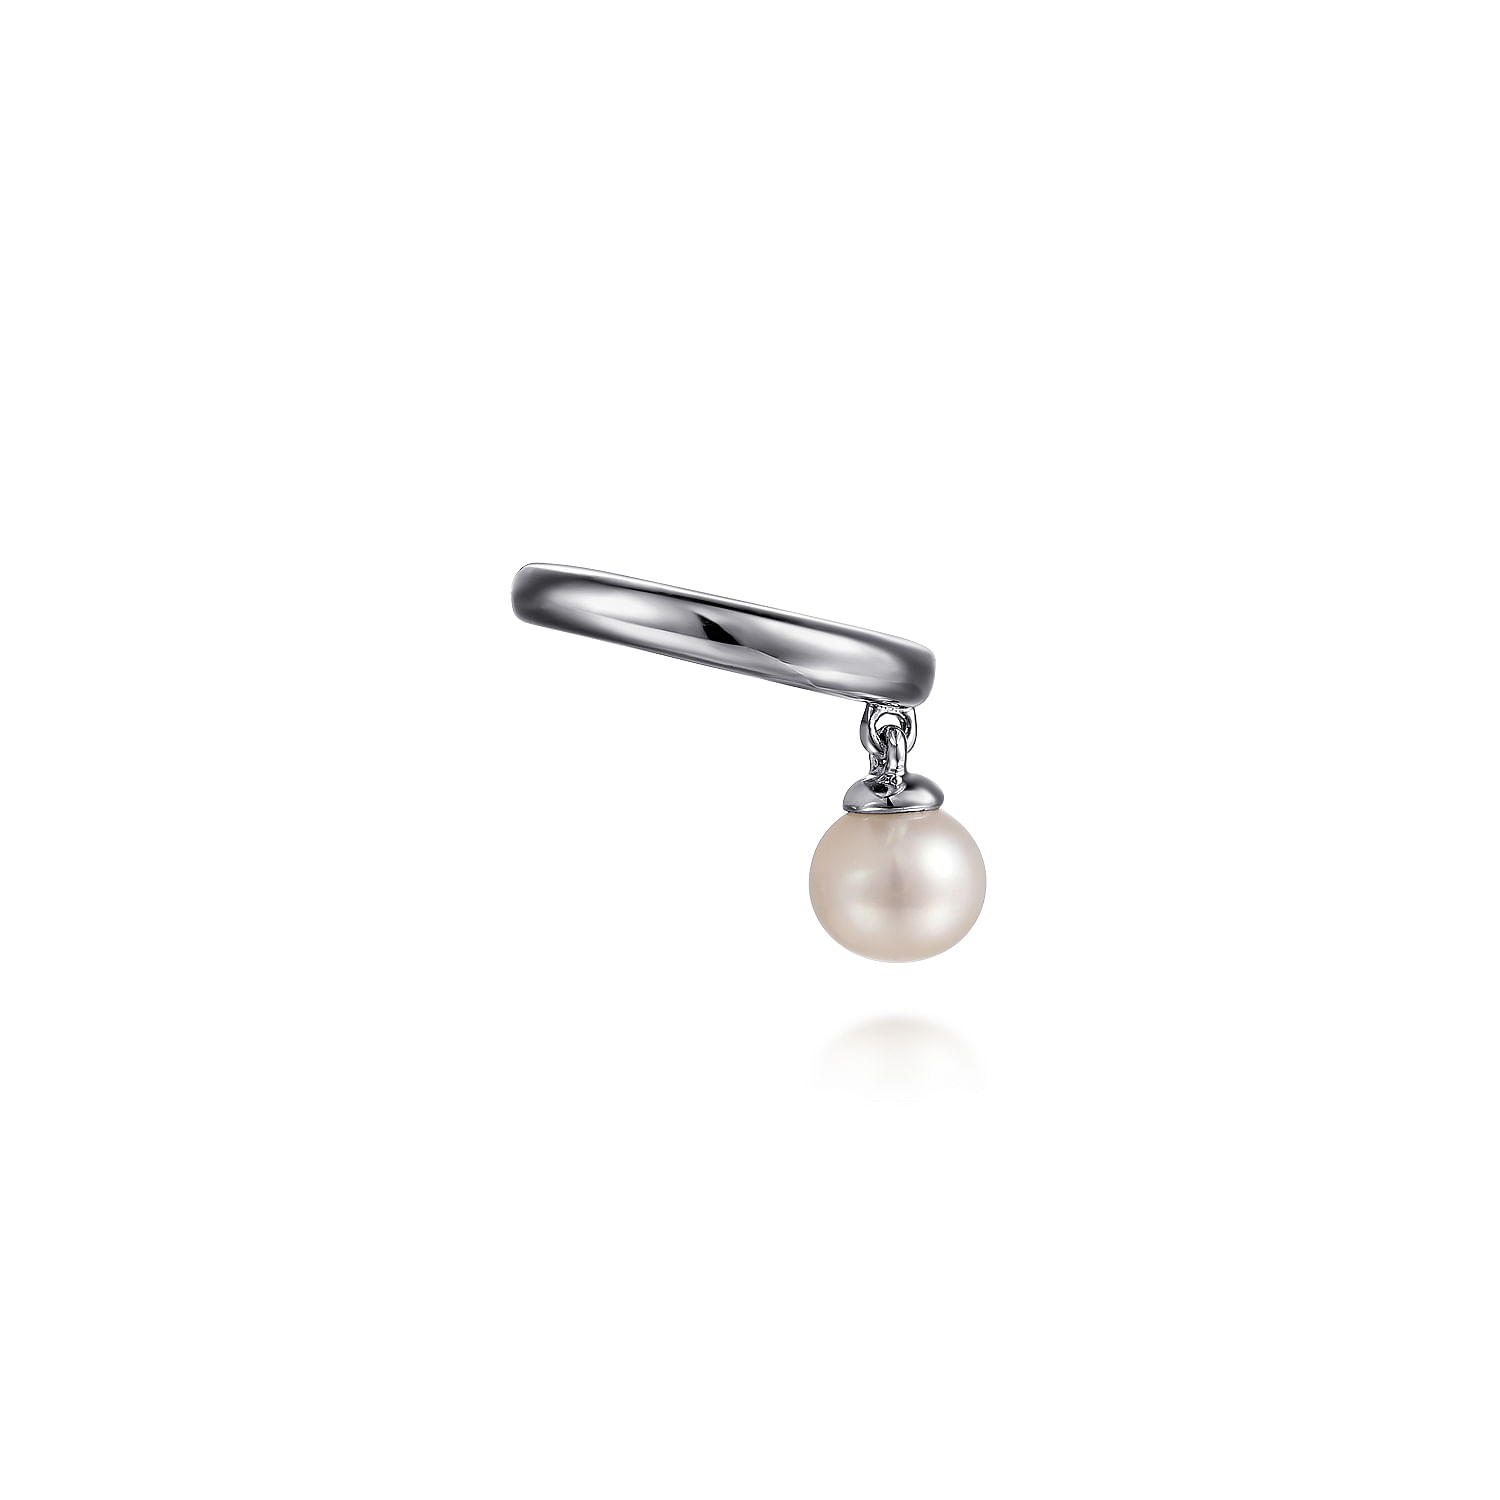 14K White Gold Ear Cuff With 5mm Hanging Pearl